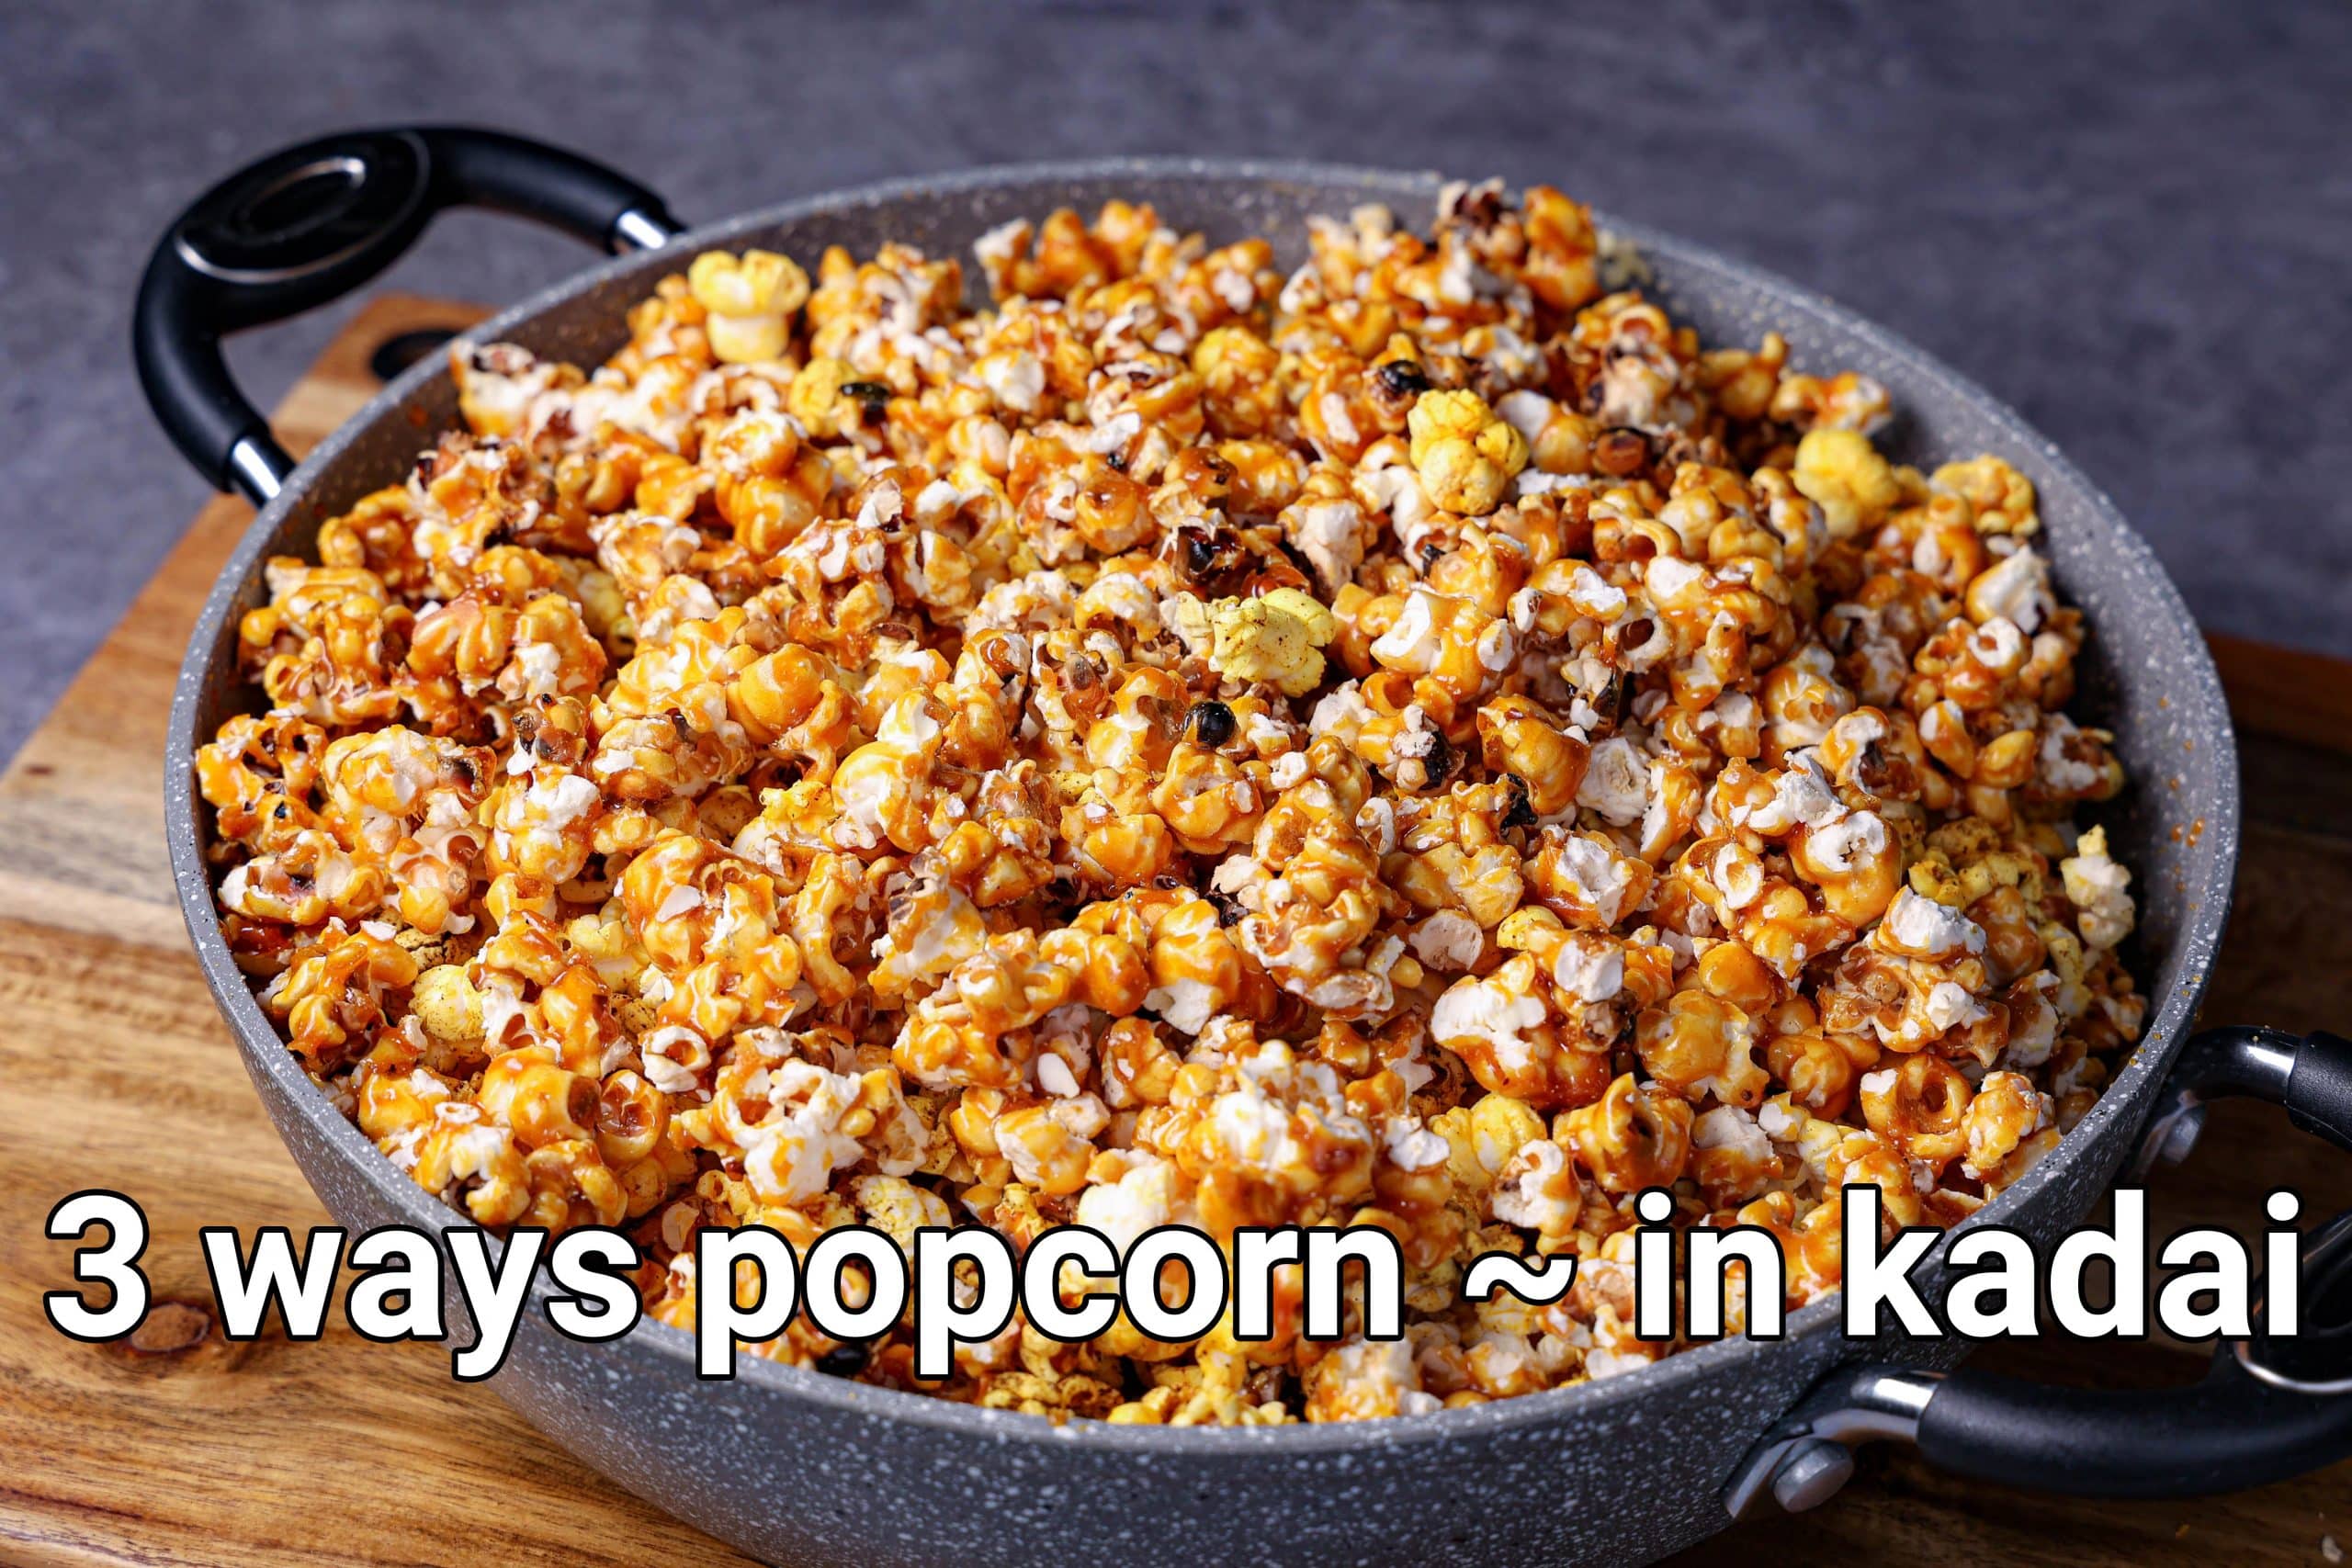 How to make movie theater popcorn at home